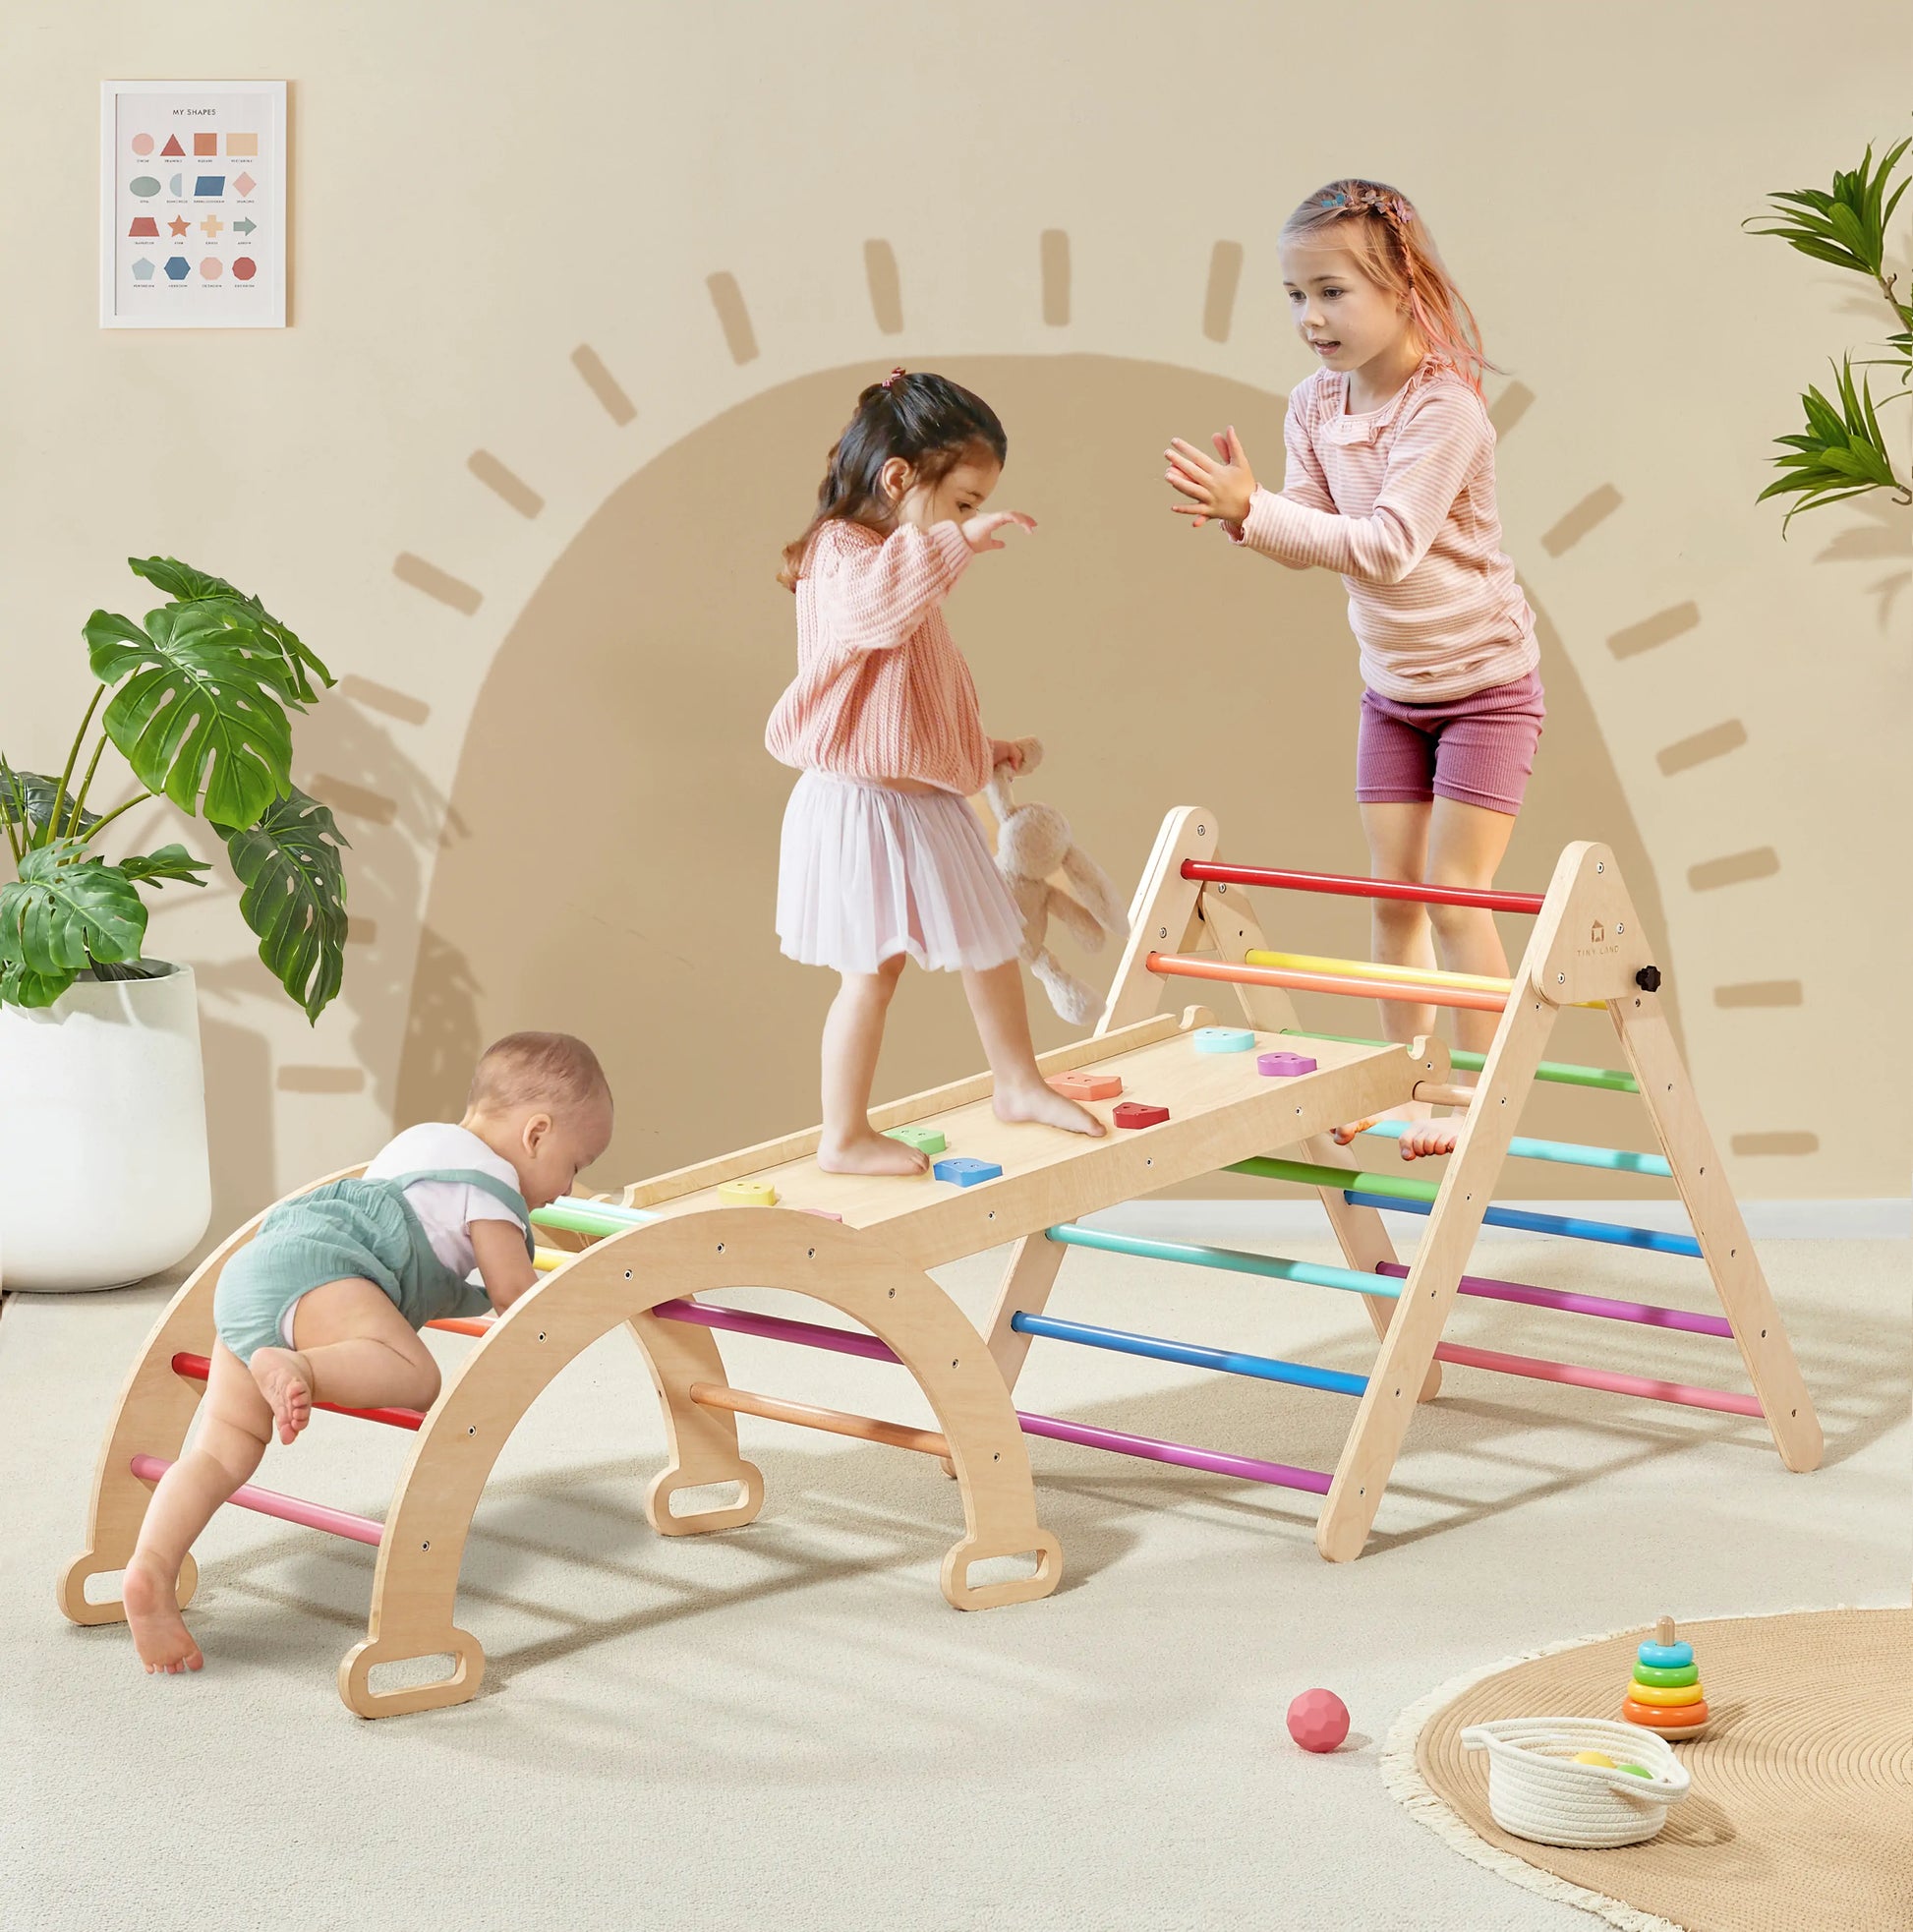 Tiny Land® 5-in-1 Rainbow climbing set | Tiny Land Offical Store® | All for Kids